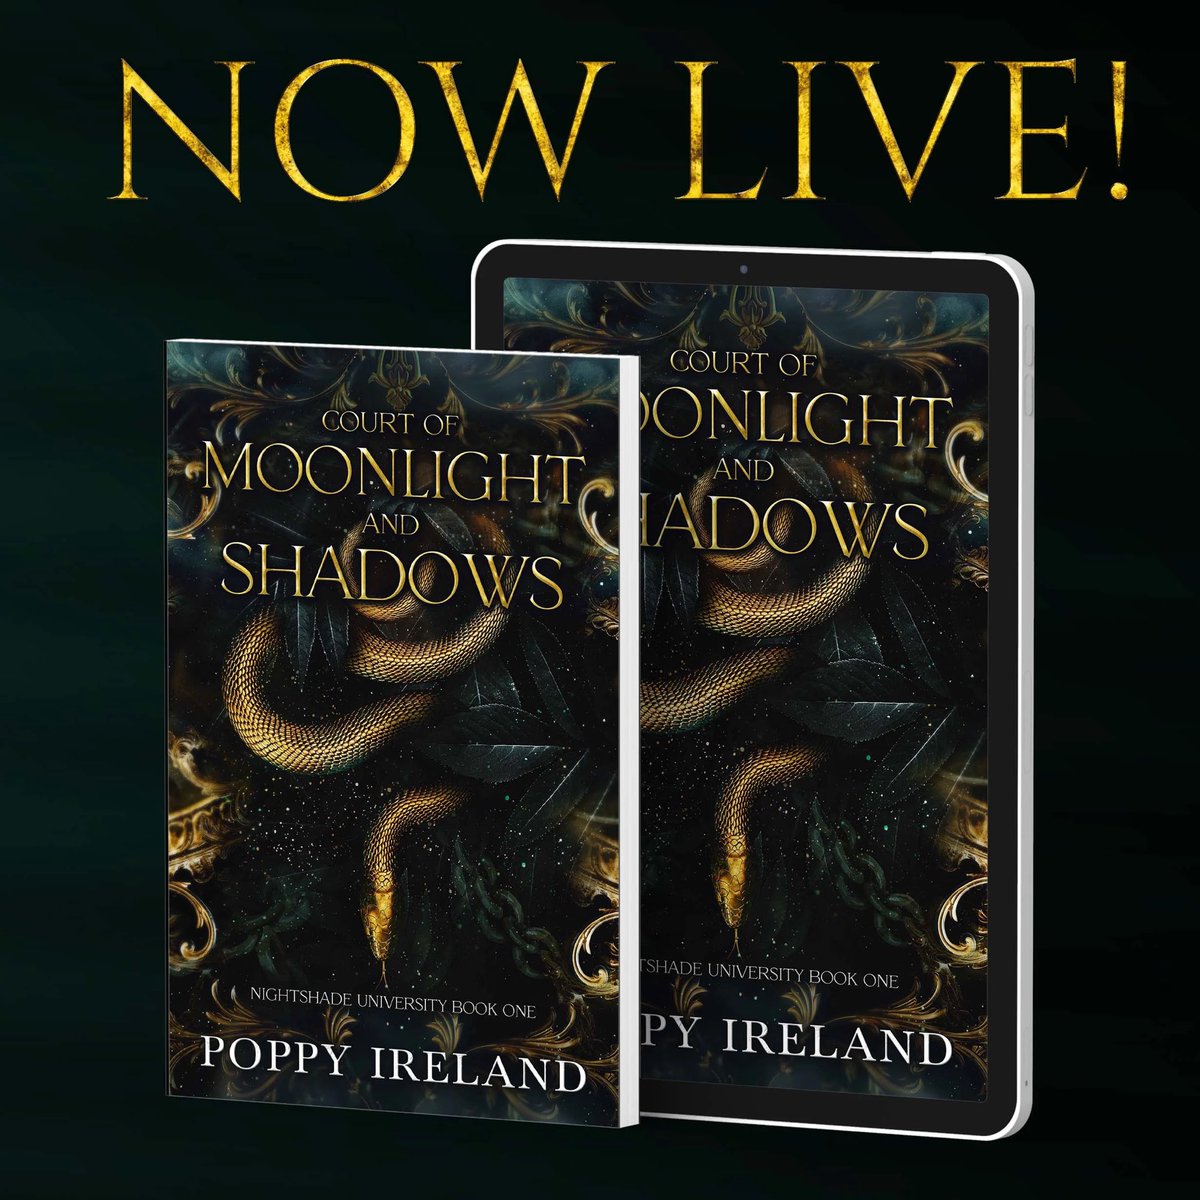 Court of Moonlight and Shadows by Poppy Ireland is #NowLive!
#OneClick your copy today: geni.us/COMASevents
For those enticed by forbidden desires and secrets that demand a price...
#EnemiestoLovers #FantasyRomance #ForbiddenRomance #FaeCourts